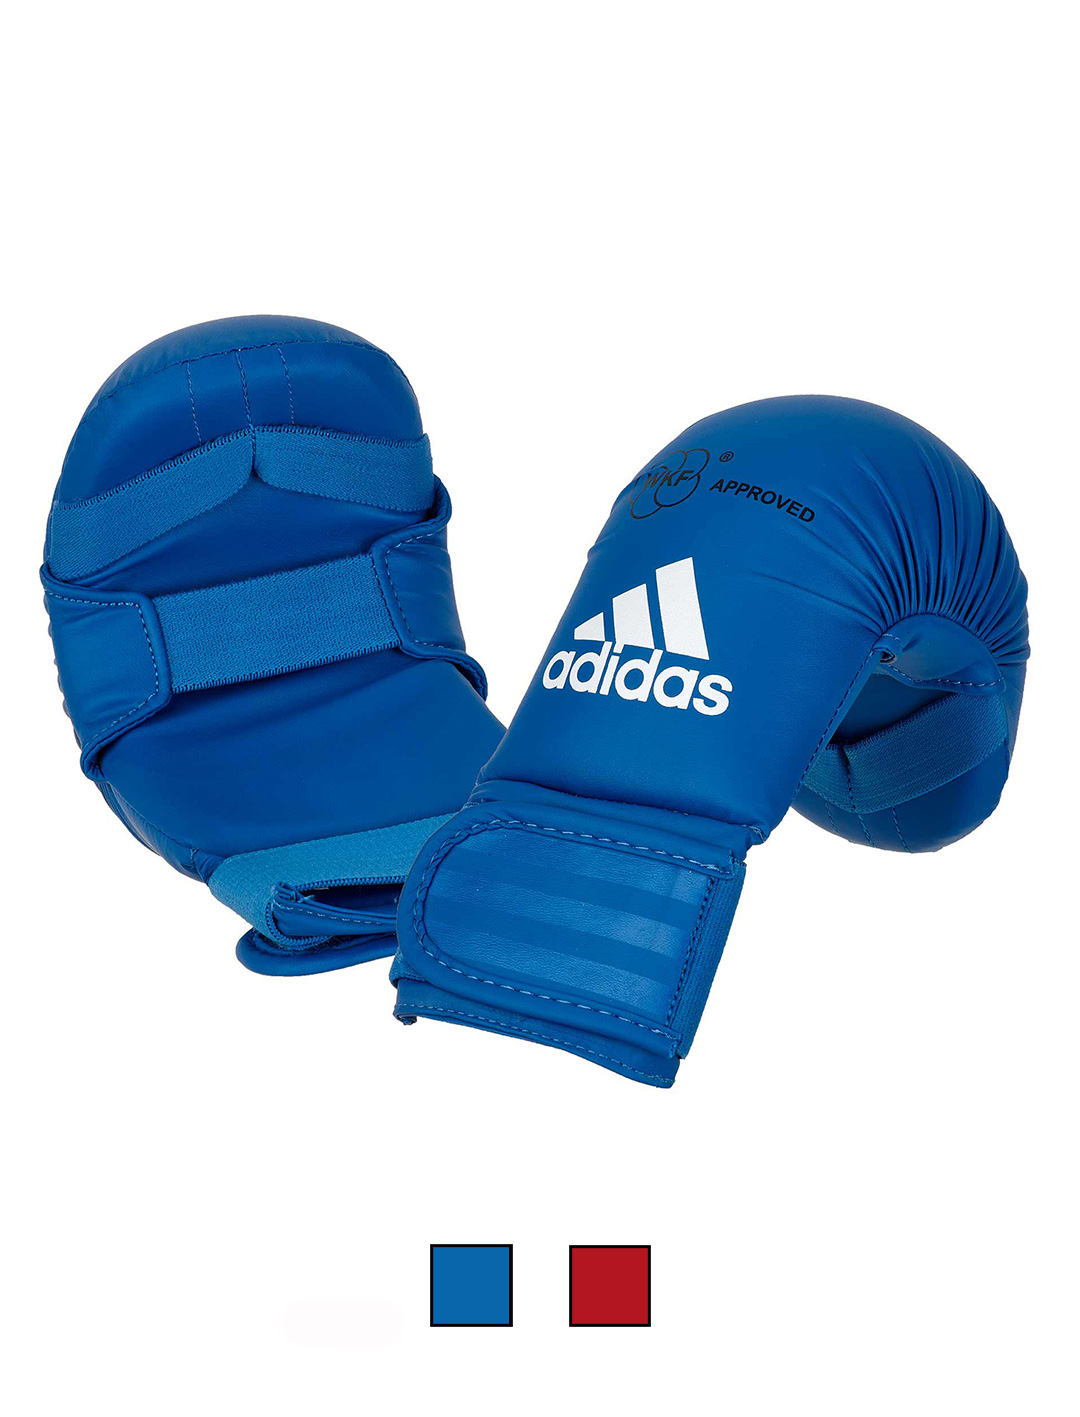 adidas kumite mitts WKF approved blue 661.22